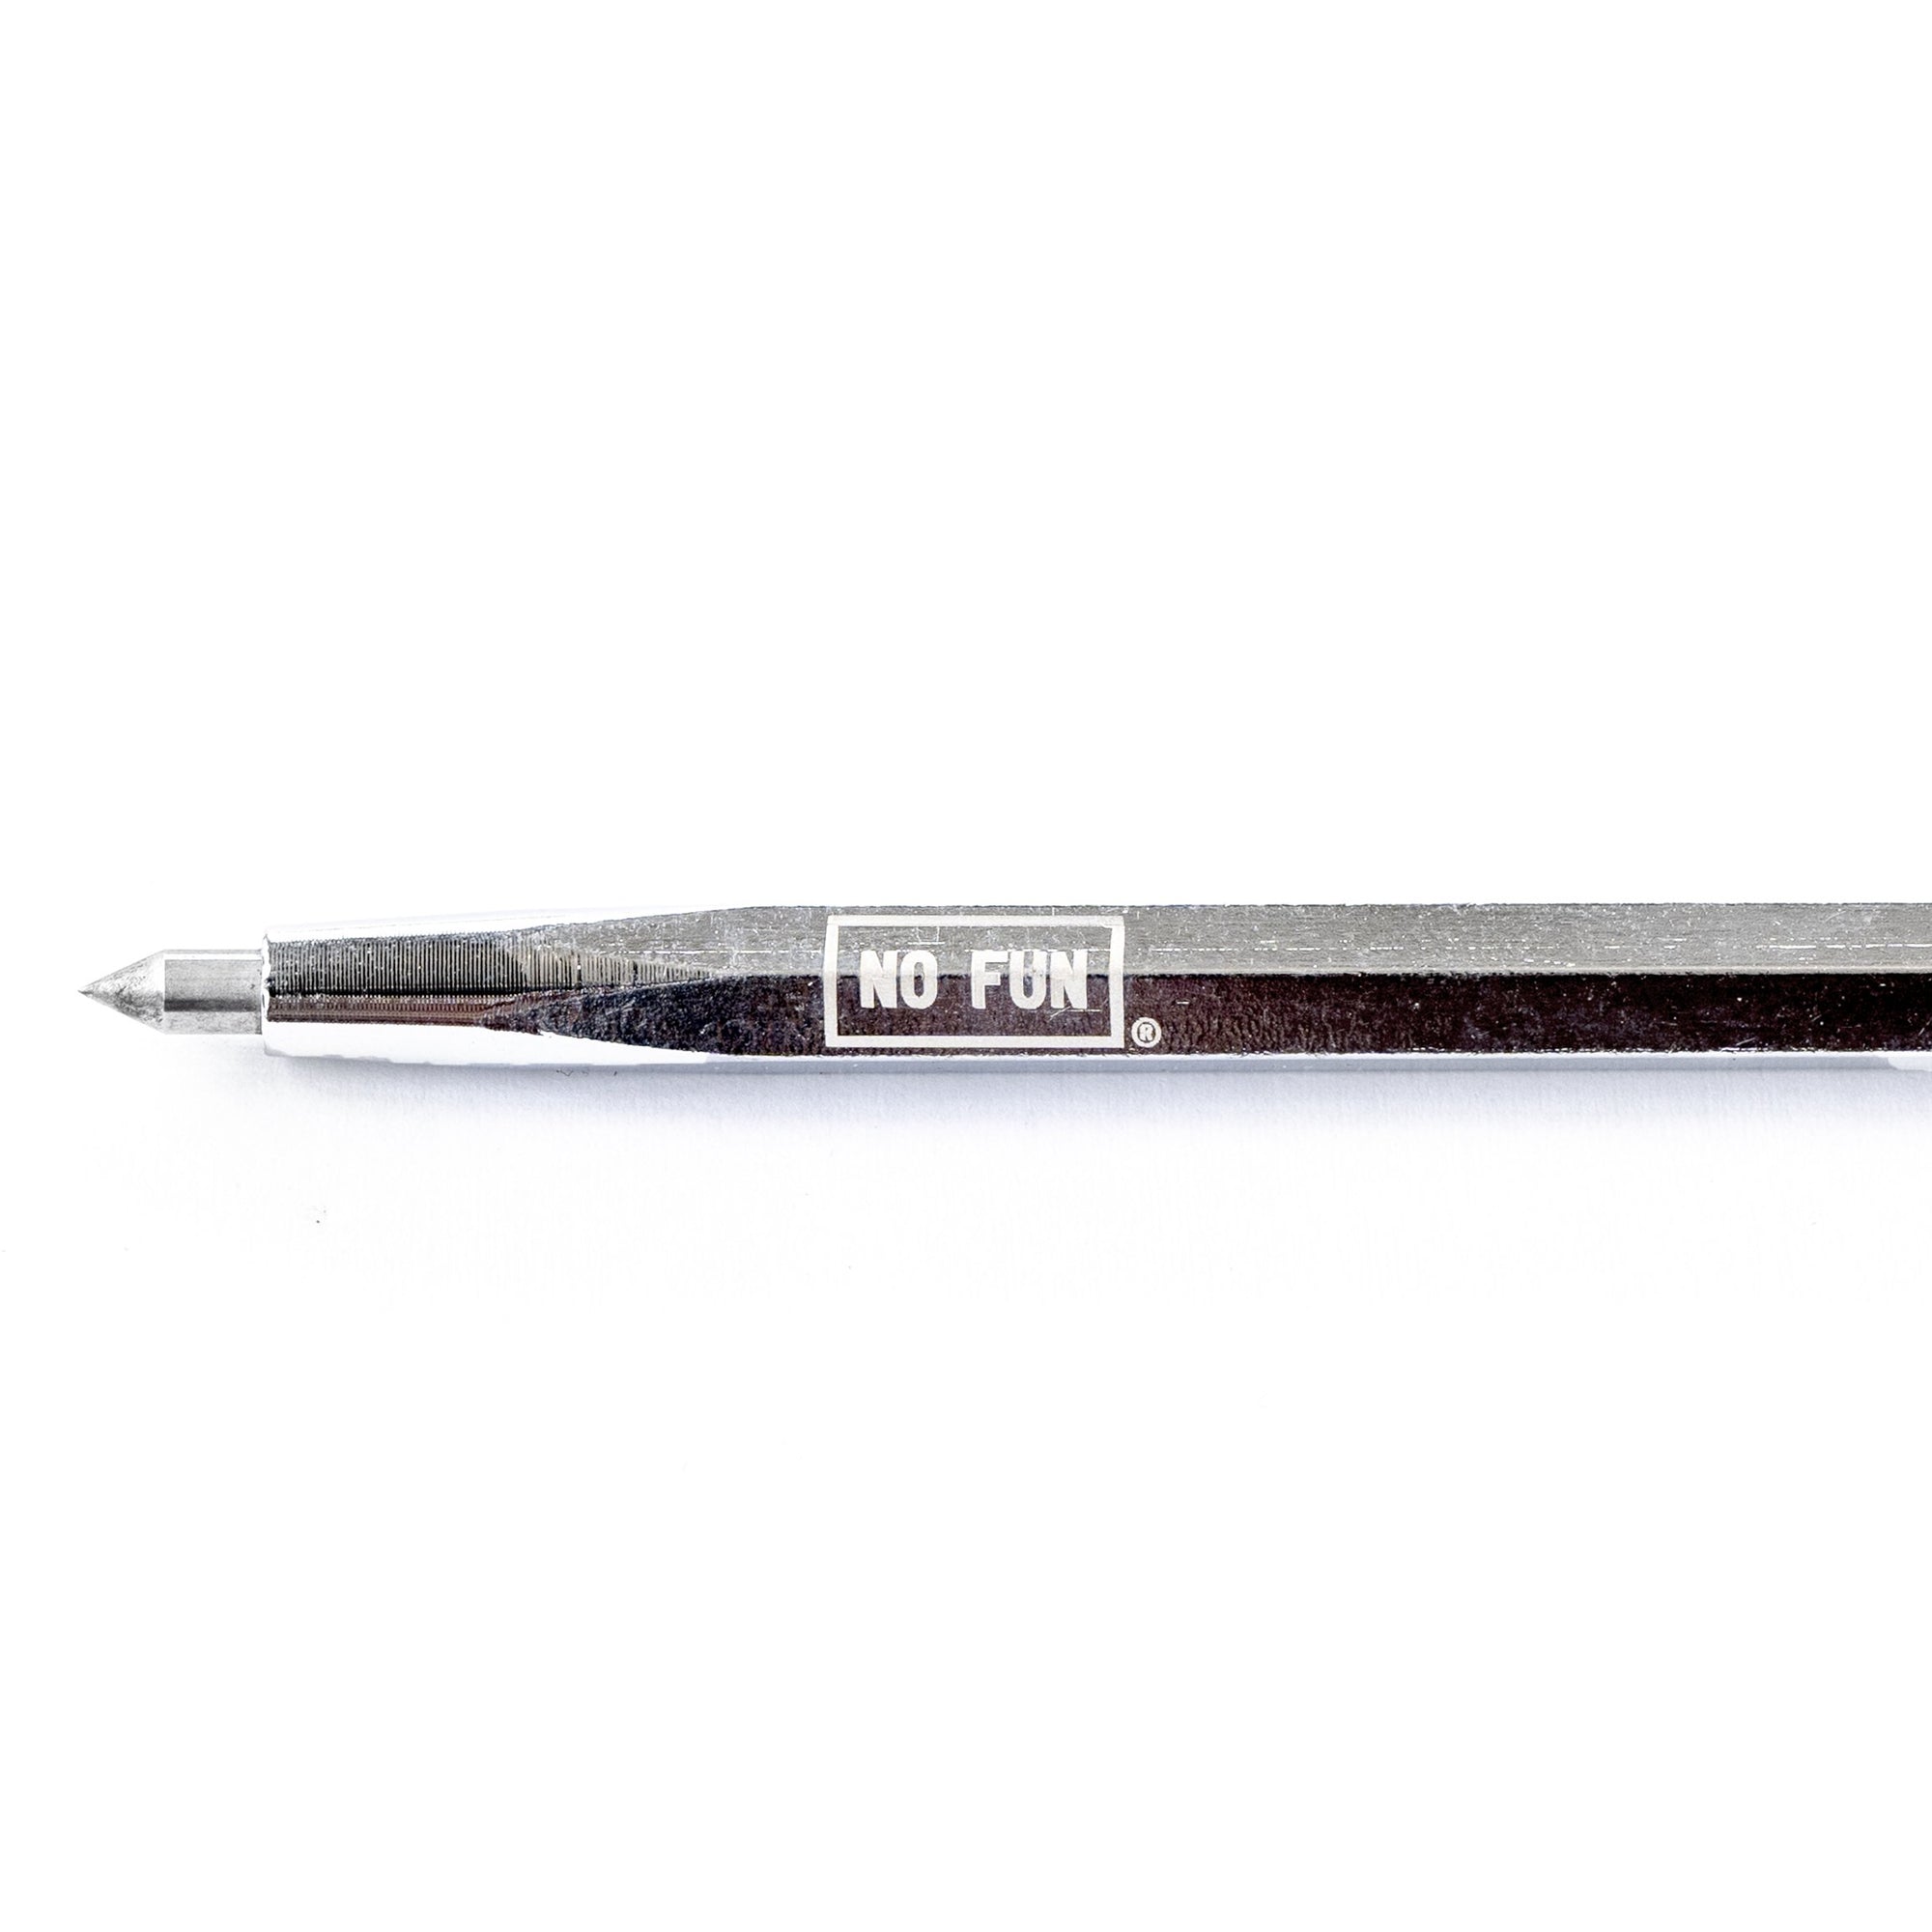 Carbide-tipped scribe pen made of extra tuff chrome steel. No Fun® logo detail engraved on the barrel. Perfect for marking all surfaces and graffiti writing. The scribe is photographed against a white backdrop.  Closeup detail of the carbide tip on the Everyday Carry scribe.